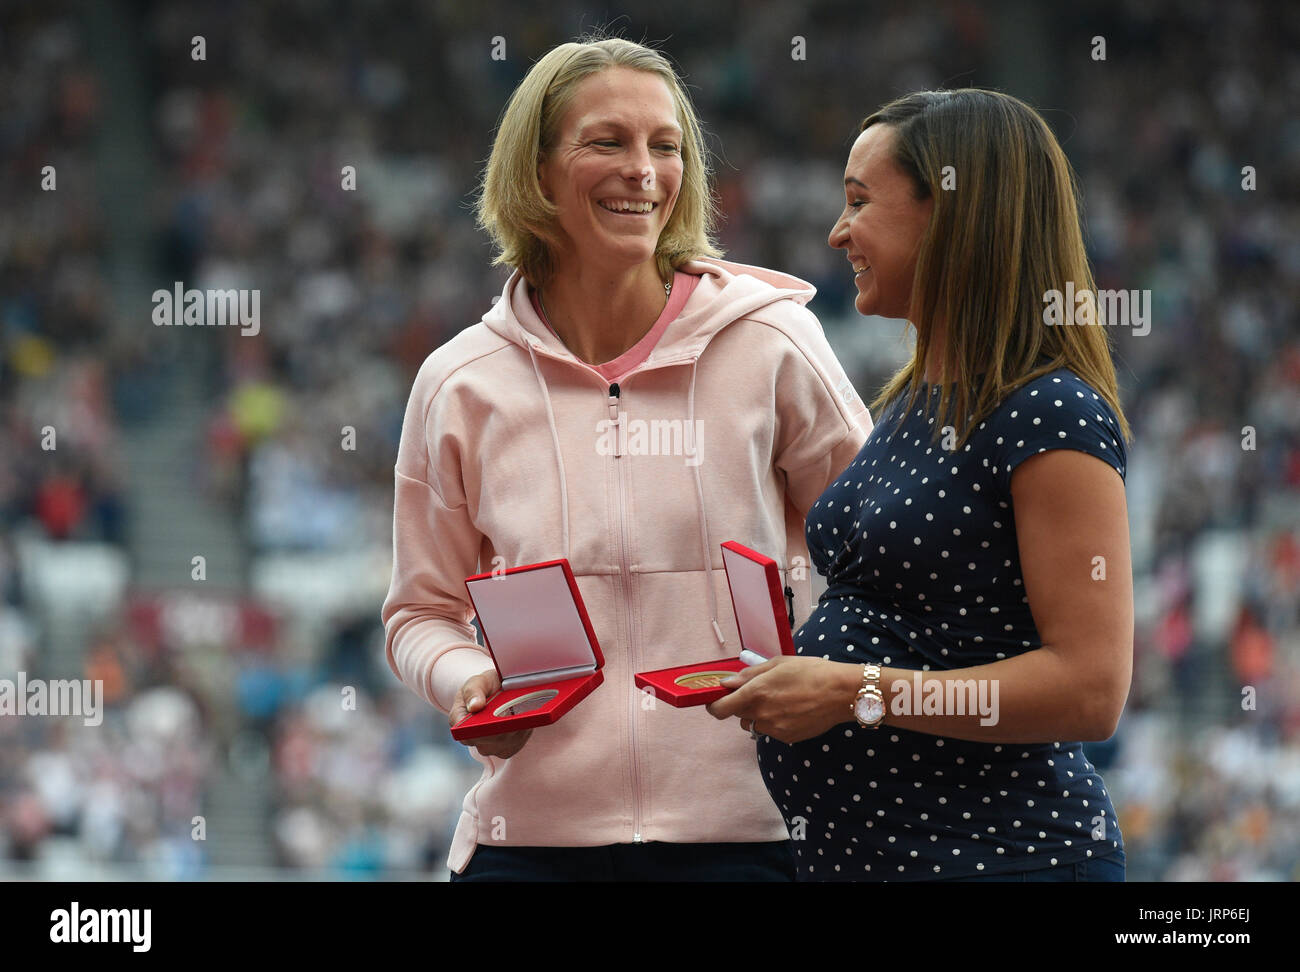 London, UK. 6th Aug, 2017. Former heptathlete Jennifer Oeser (L) of Germany belatedly receives her silver medal in the heptathlon of 2011 at the IAAF World Championships at the Olympic Stadium in Athletics in London, UK, 6 August 2017. Britain's Jessica Ennis (r) was named world champion. Oeser moved from third to second place after then-champion Tatyana Chernova of Russia was disqualified for doping. Photo: Rainer Jensen/dpa/Alamy Live News Stock Photo